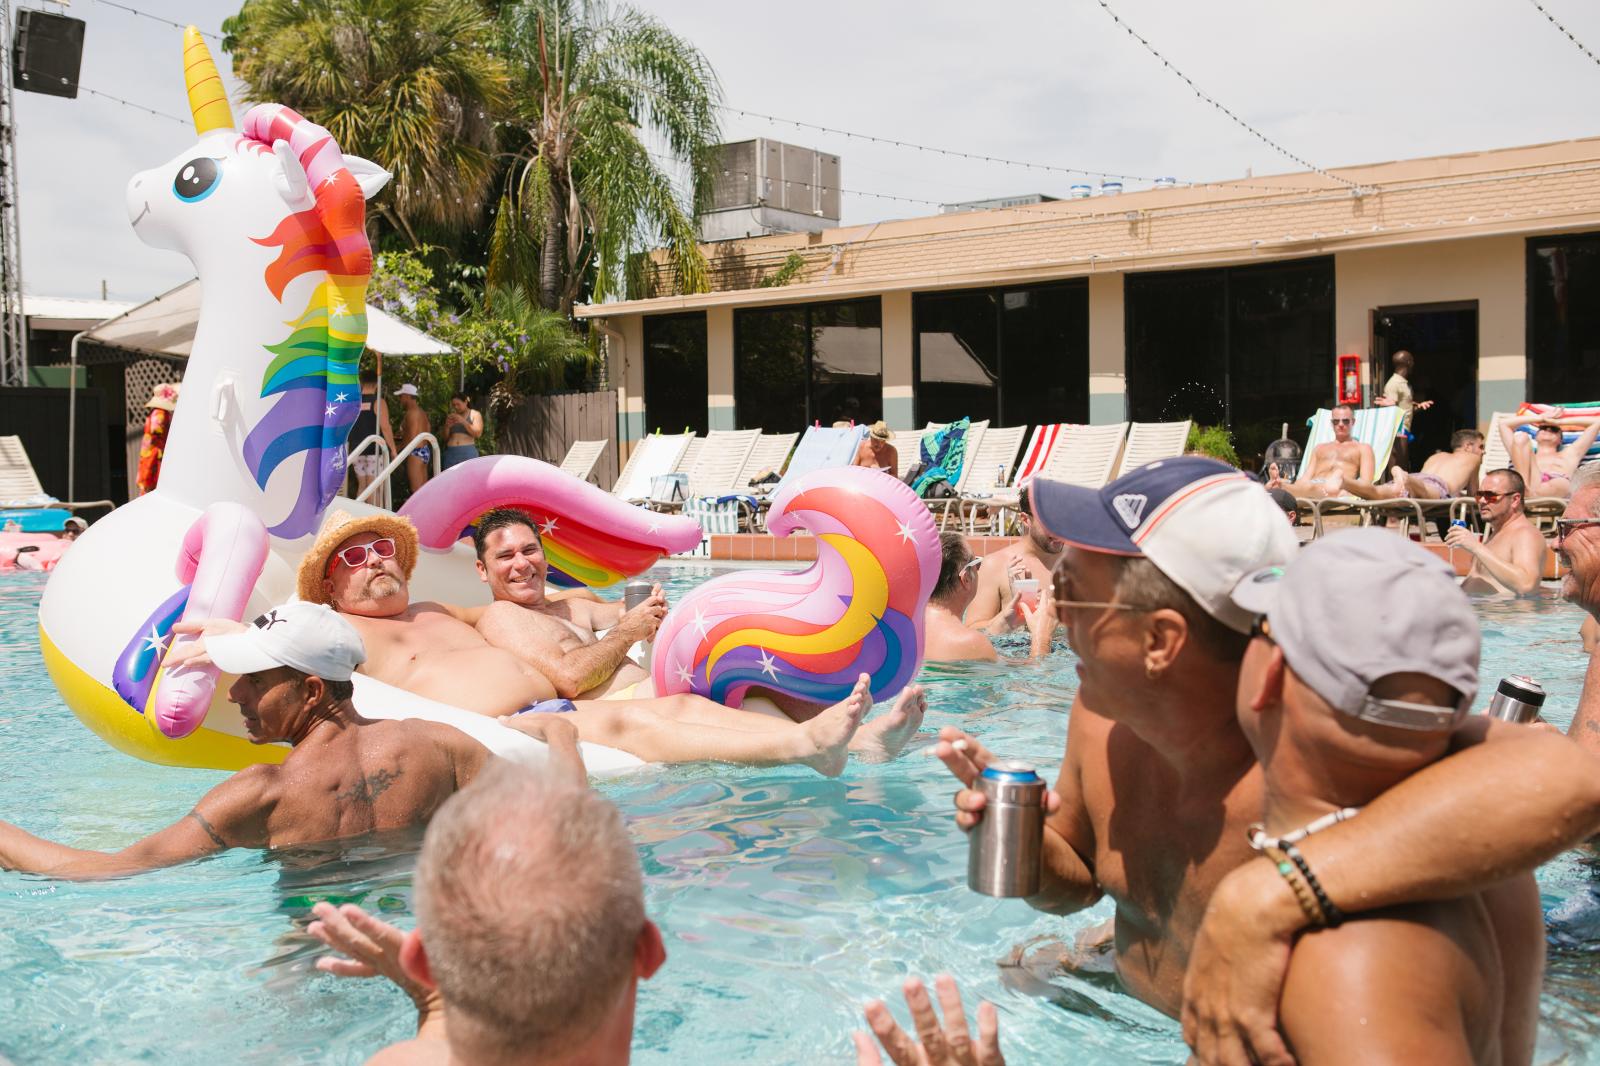 Image from Homepage - Men hang out at the pool during a party at Parliament...